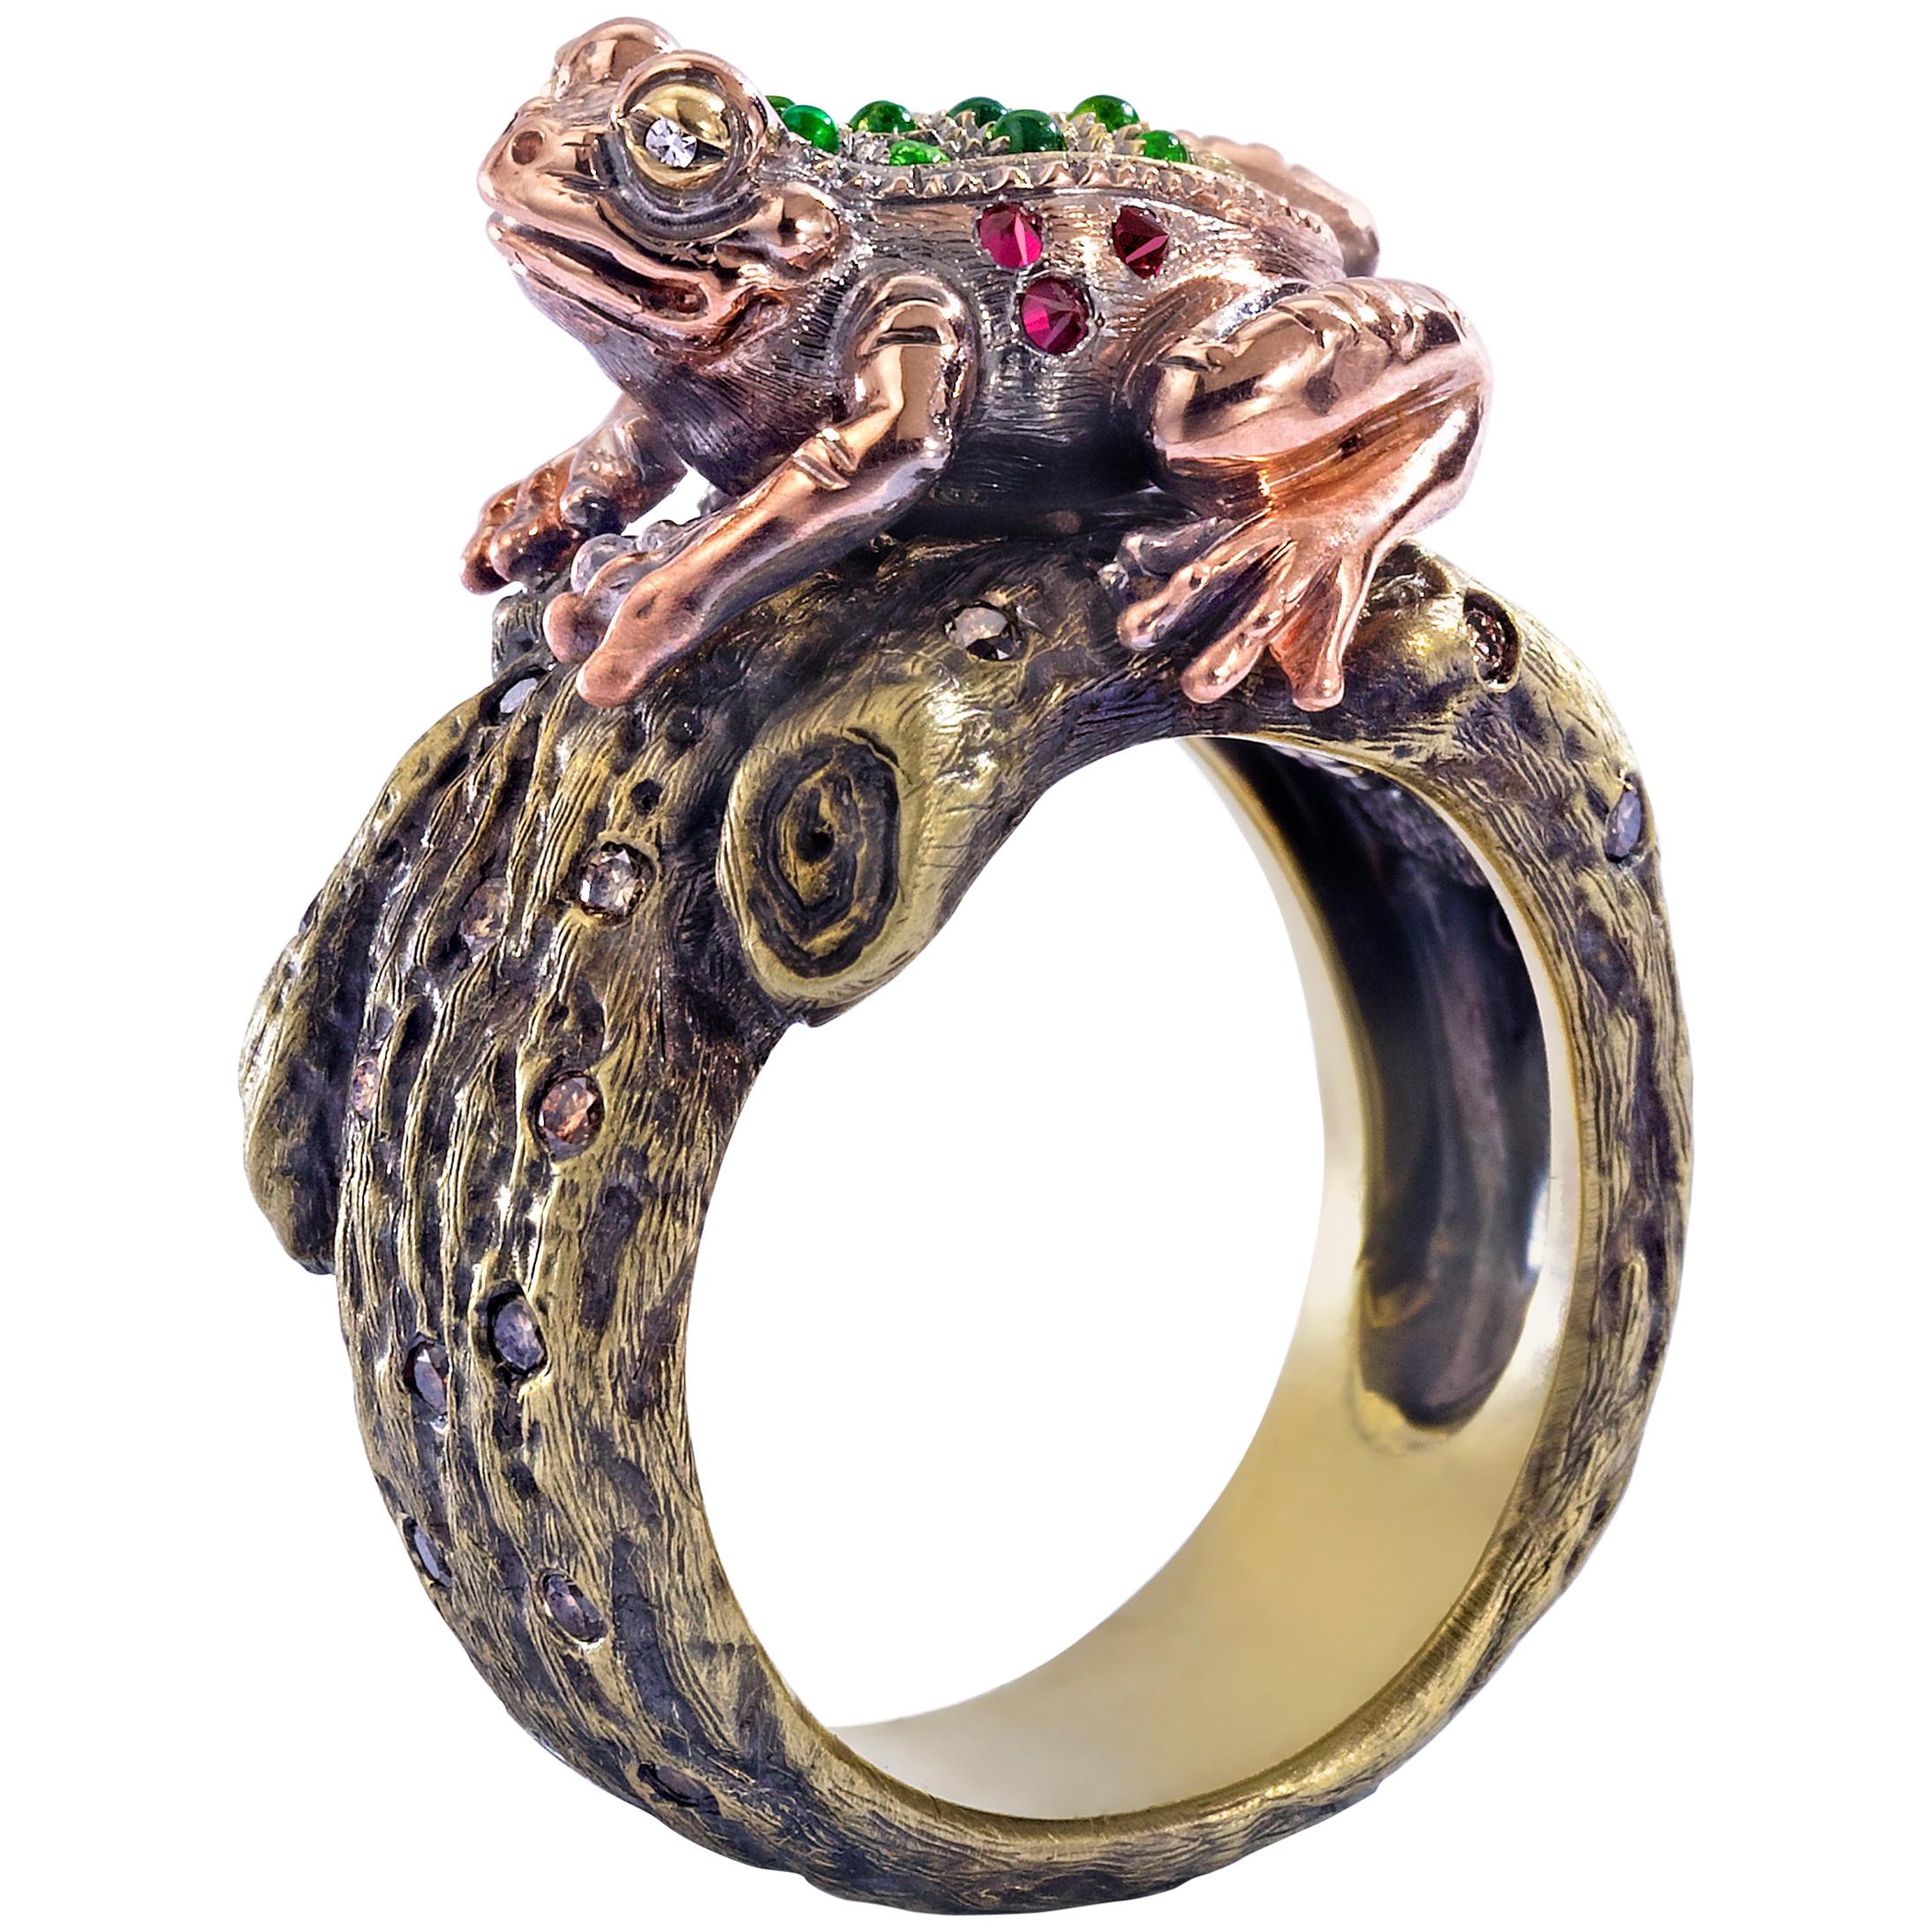 Wendy Brandes One-of-a-Kind 18K Gold and Gemstone Frog Ring With Hidden Prince